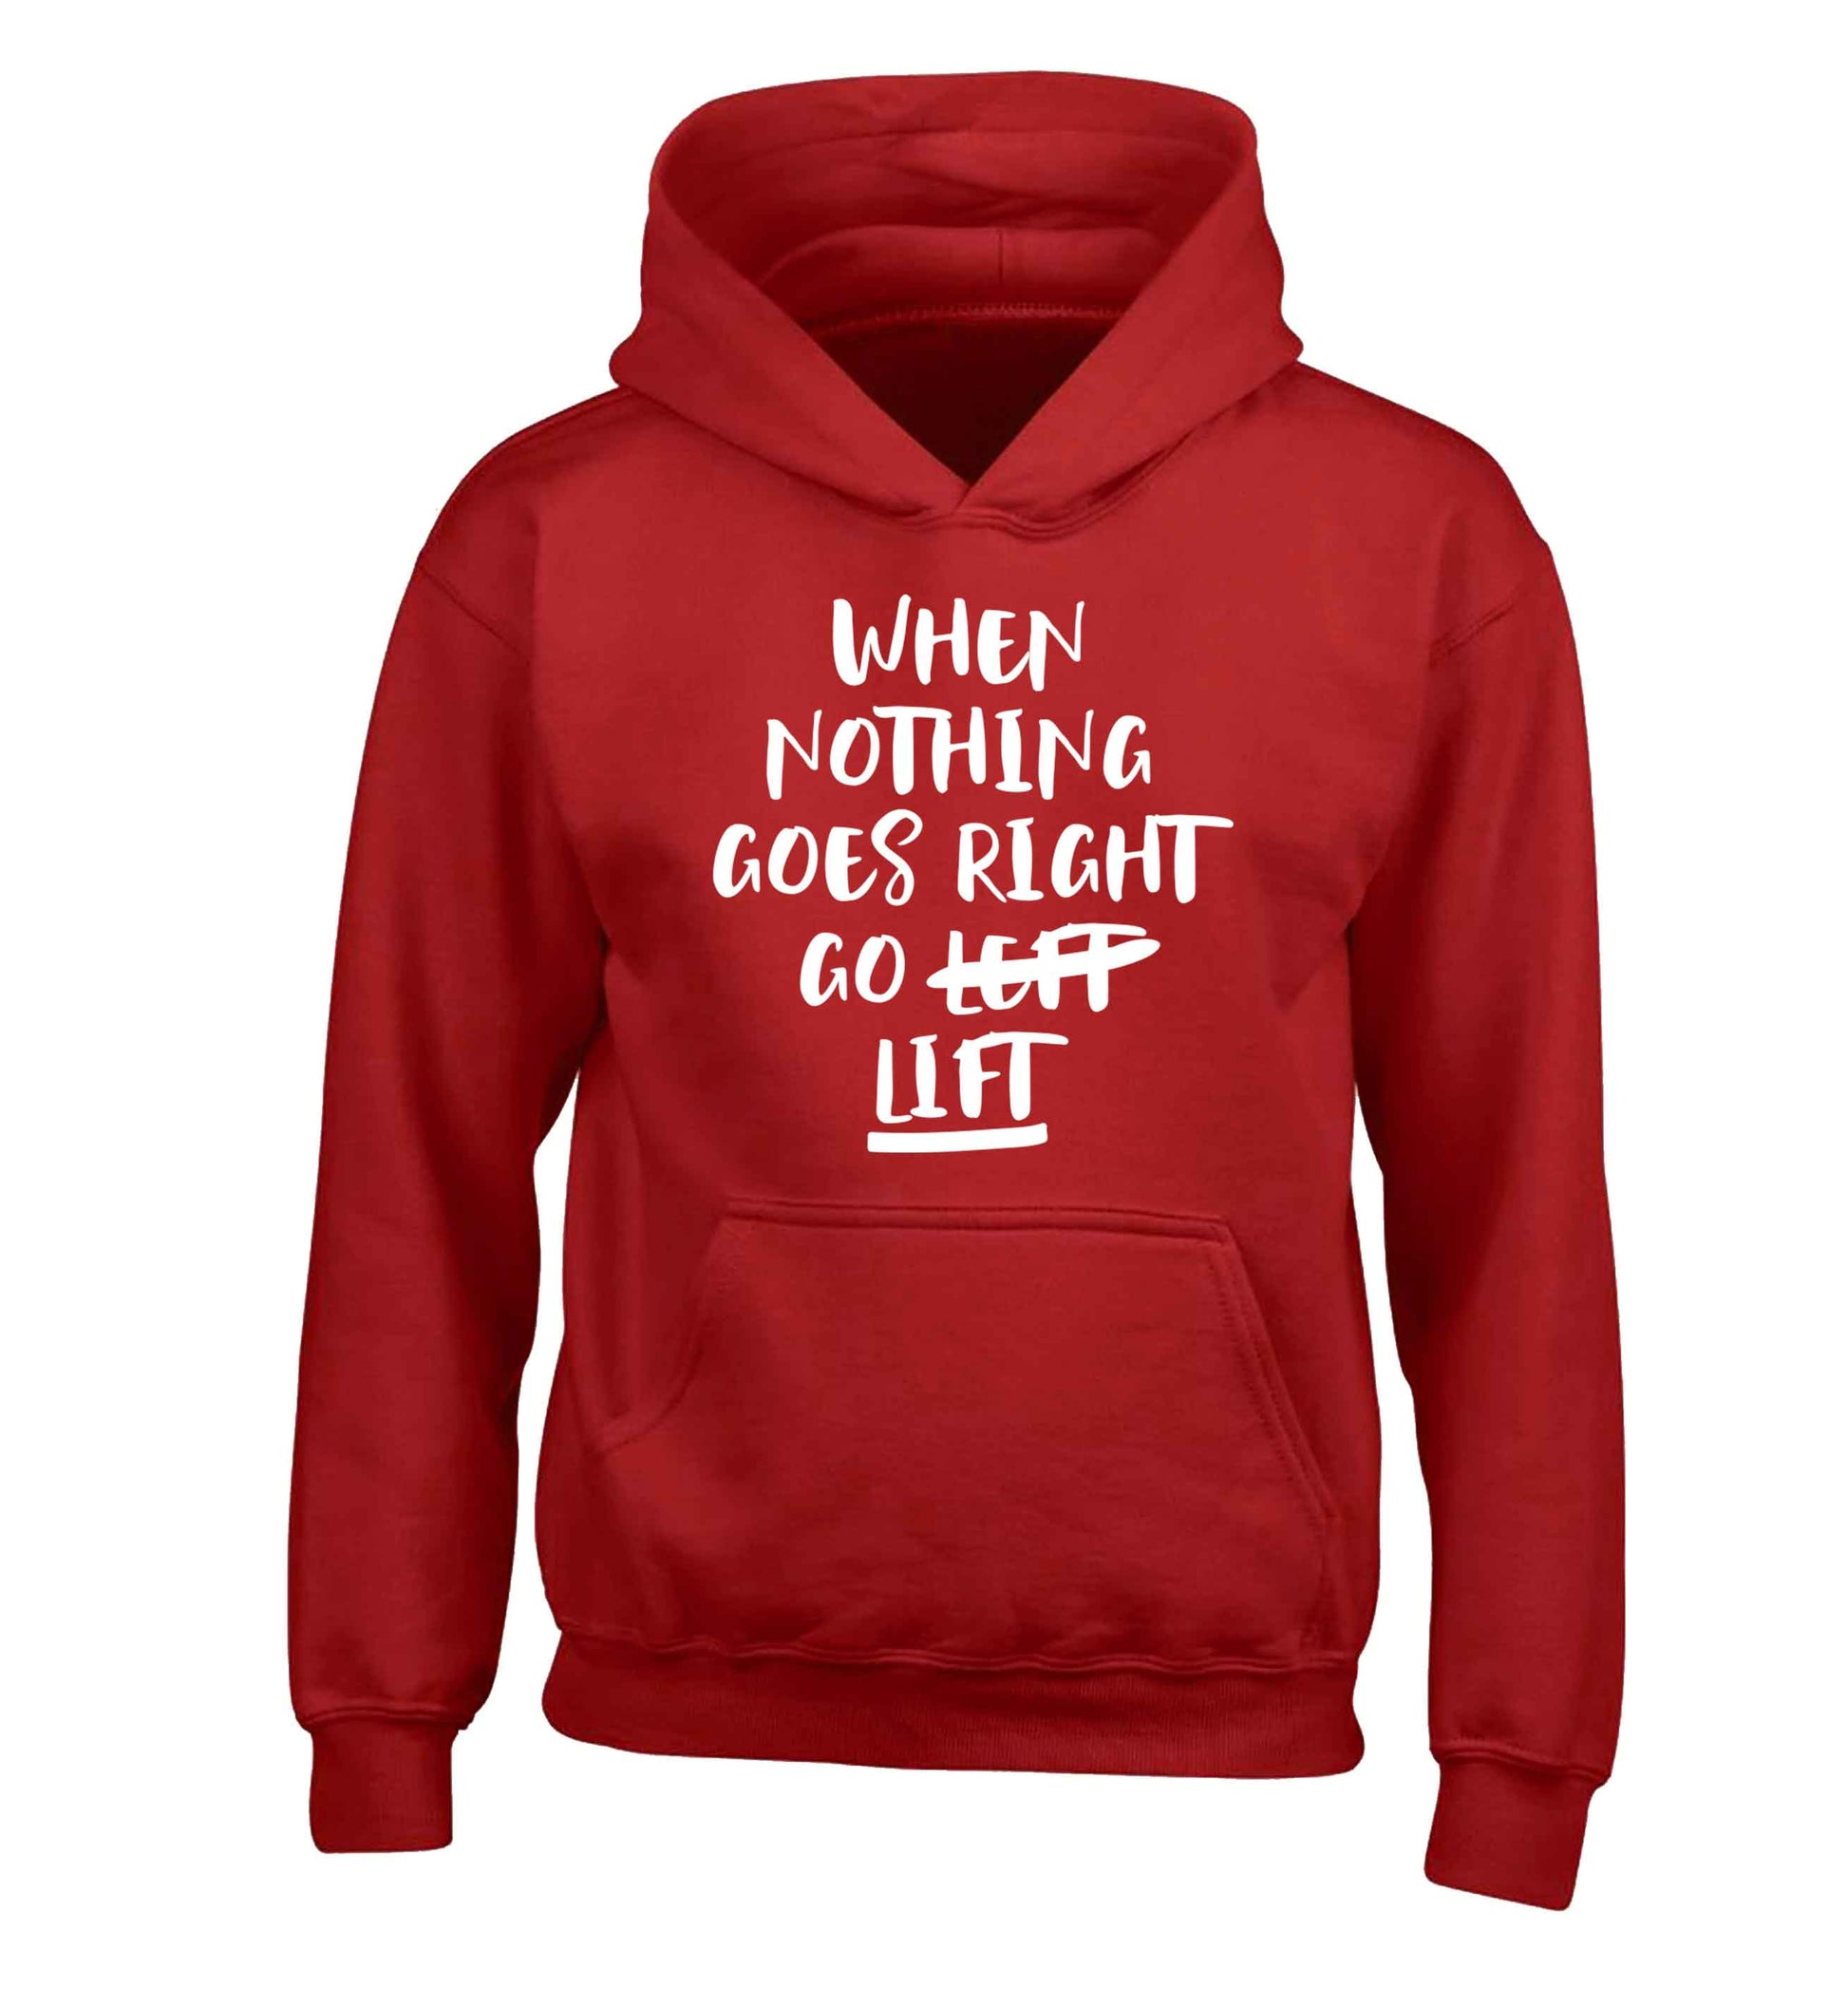 When nothing goes right go lift children's red hoodie 12-13 Years